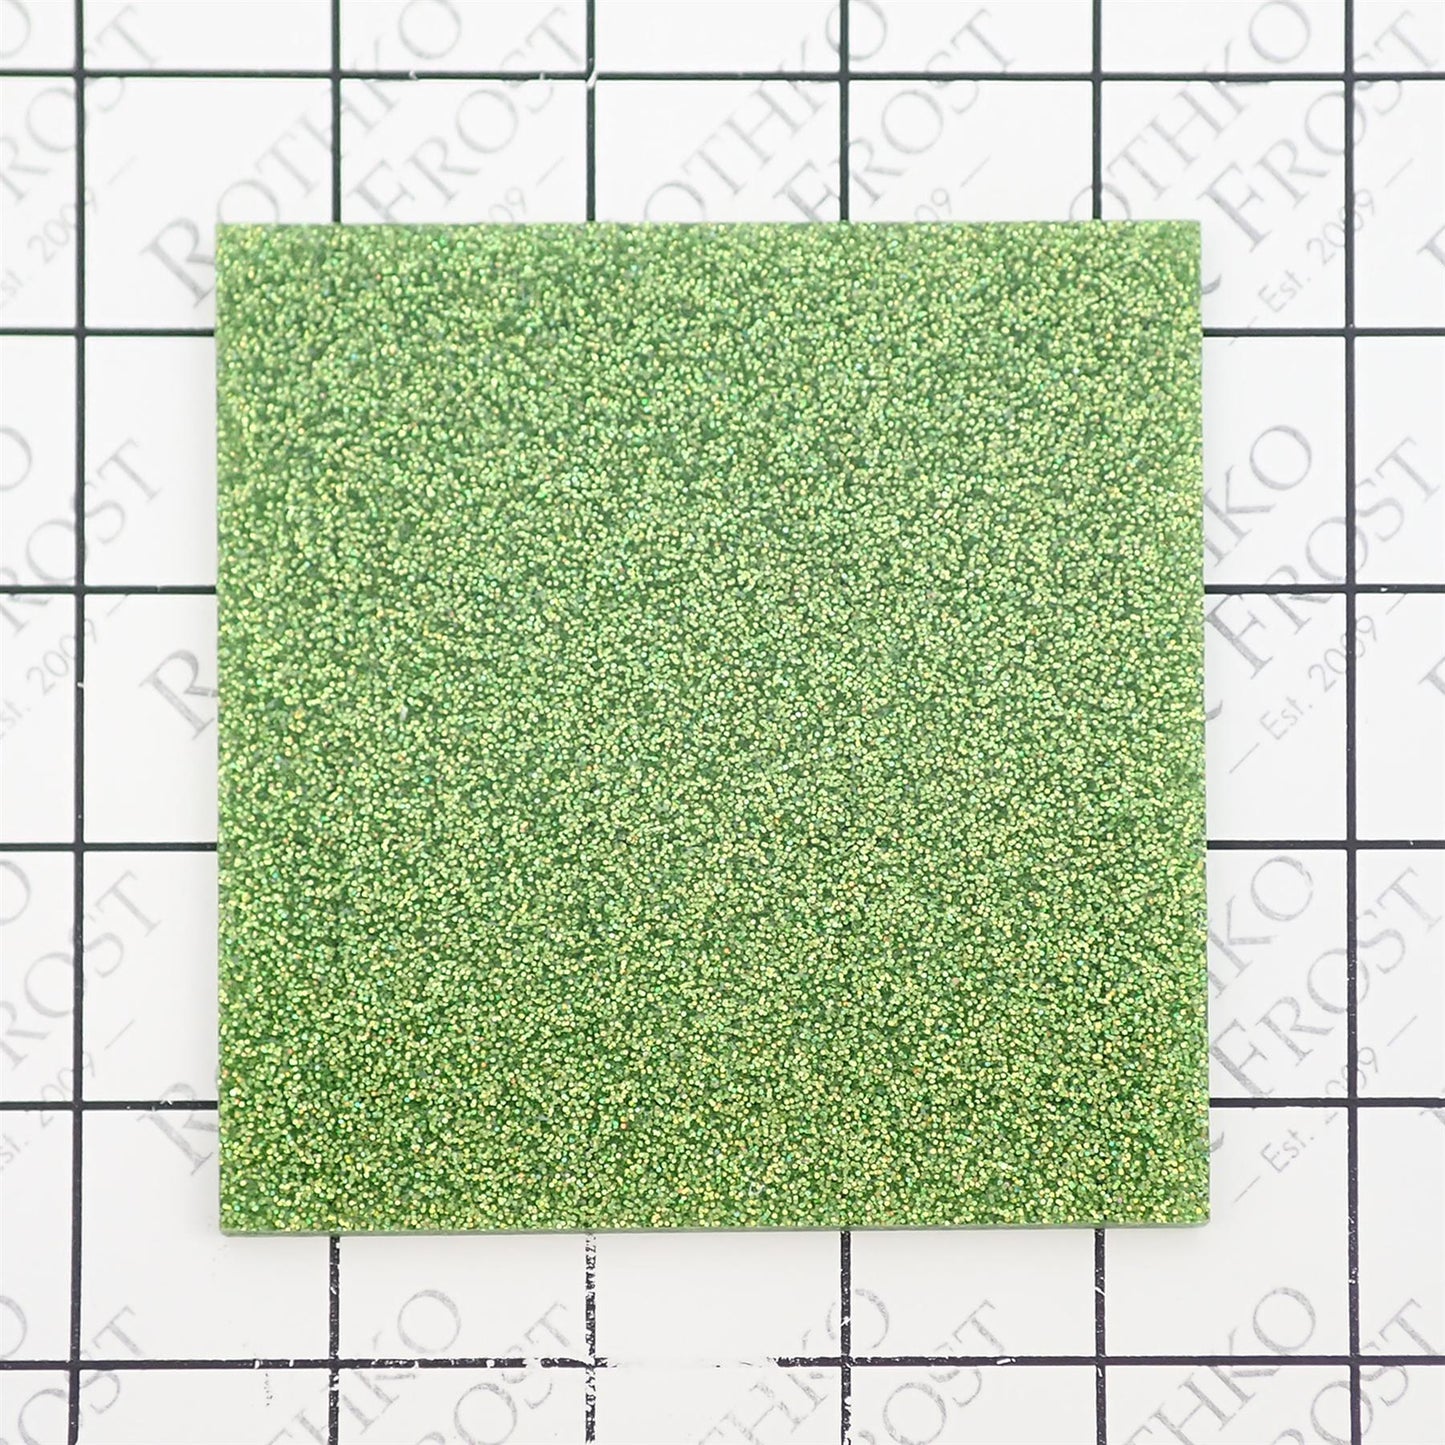 Incudo Apple Green 2-Sided Holographic Glitter Acrylic Sheet - 400x300x3mm (15.7x11.81x0.12")